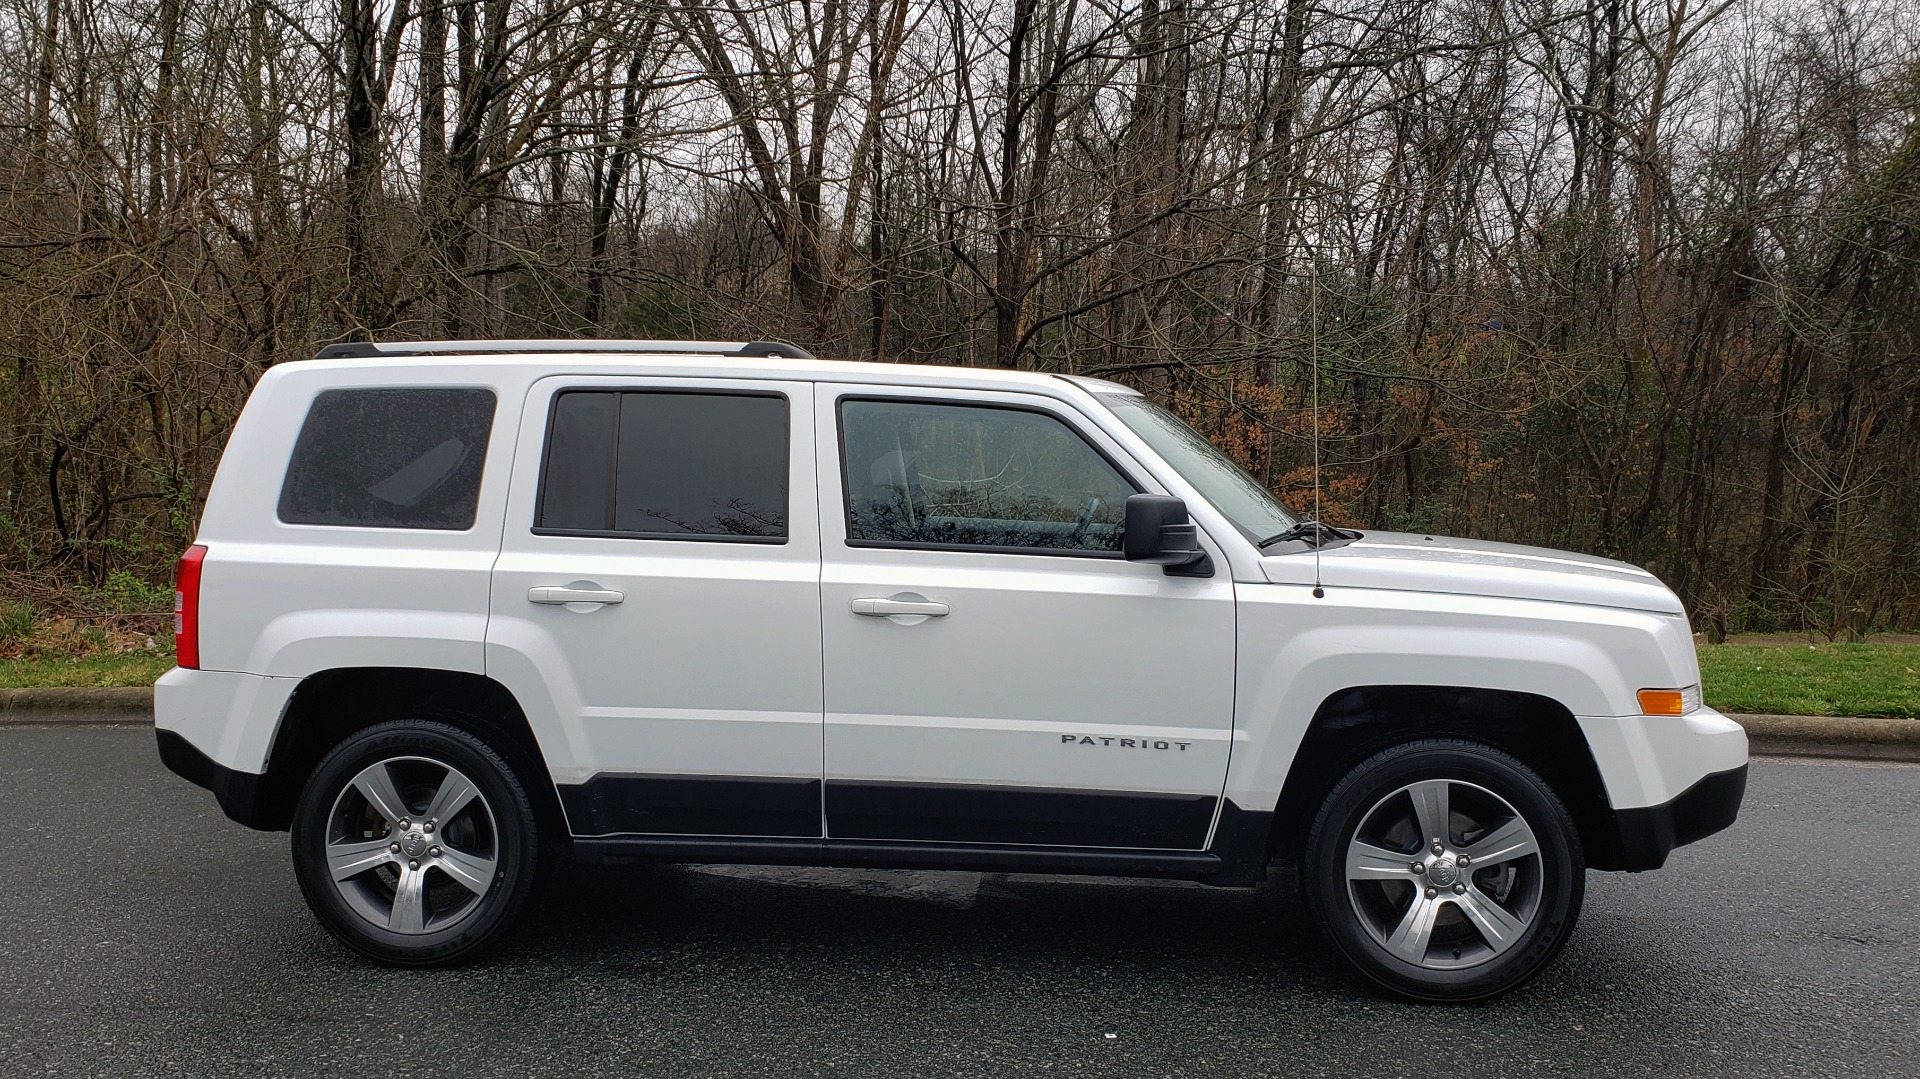 Used 2016 Jeep Patriot High Altitude Edition for sale Sold at Formula Imports in Charlotte NC 28227 5